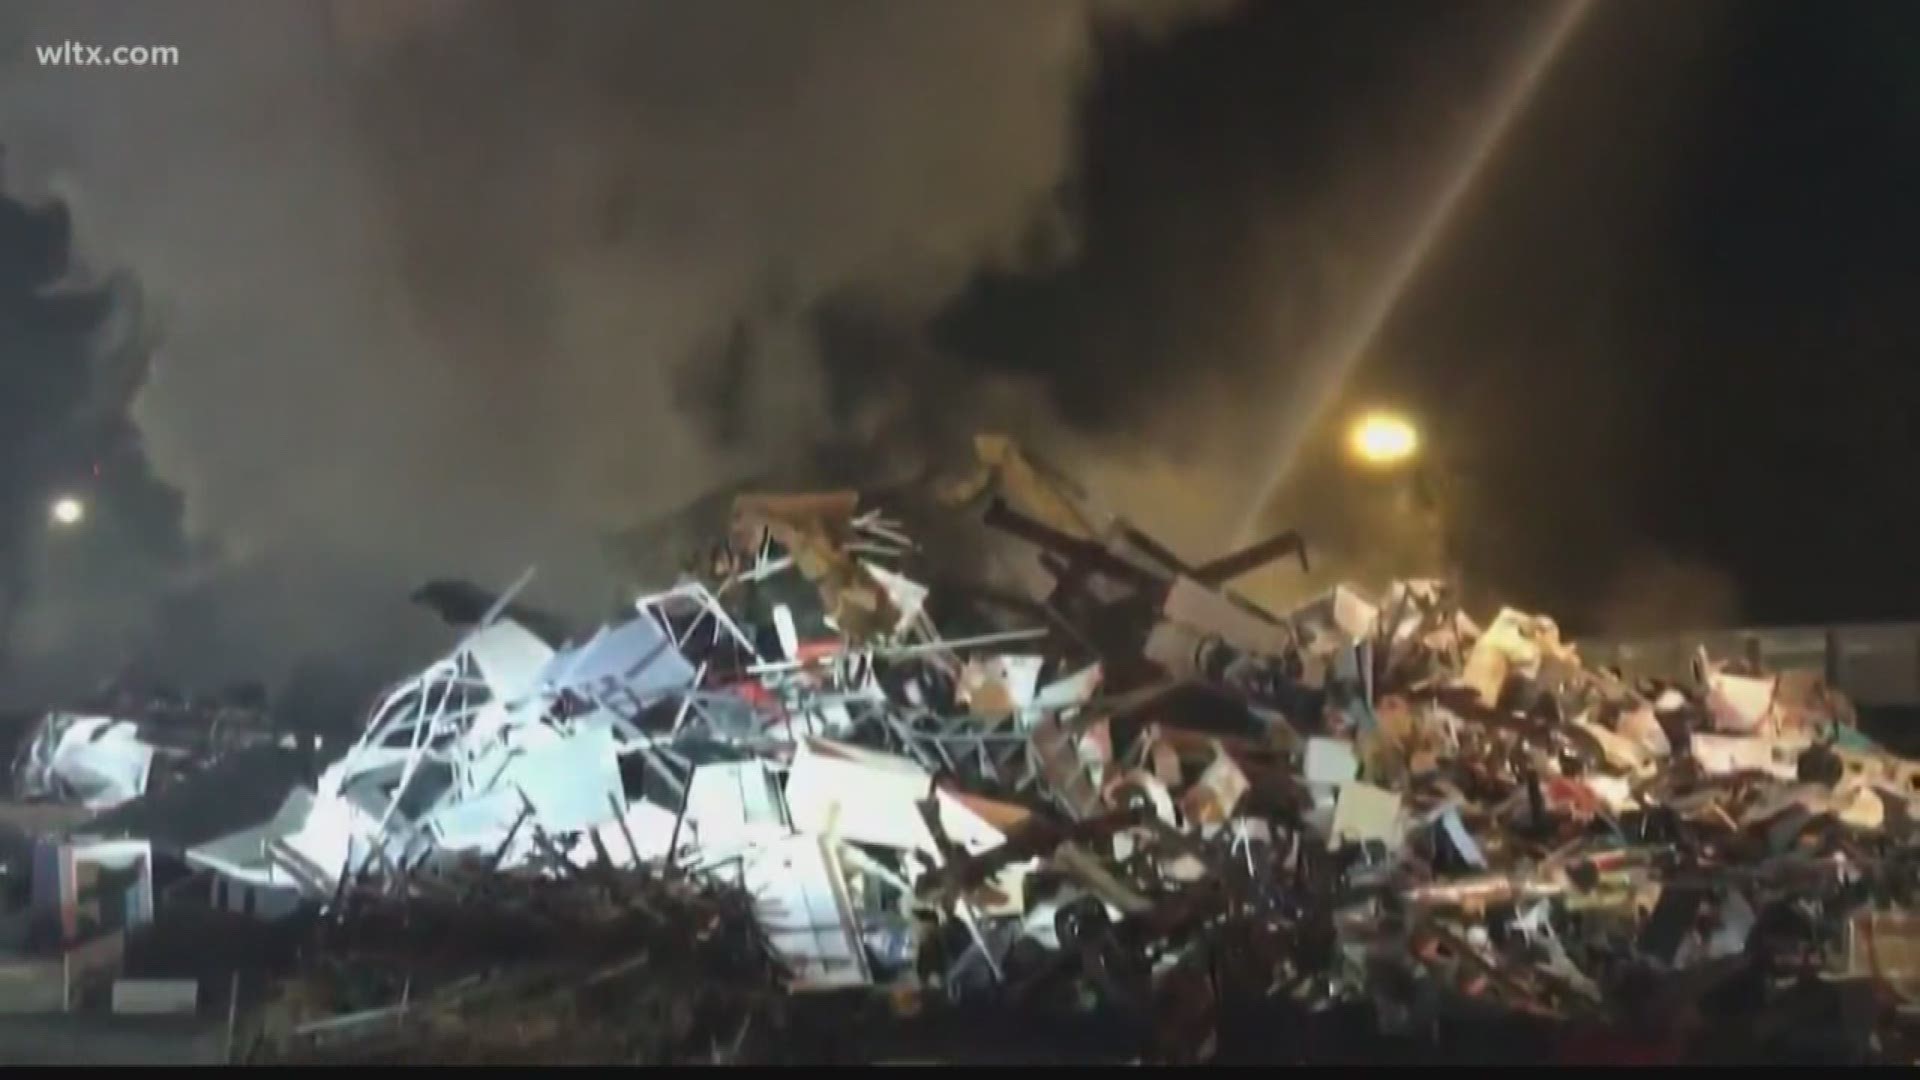 Firefighters were called to American Scrap Iron & Metal overnight